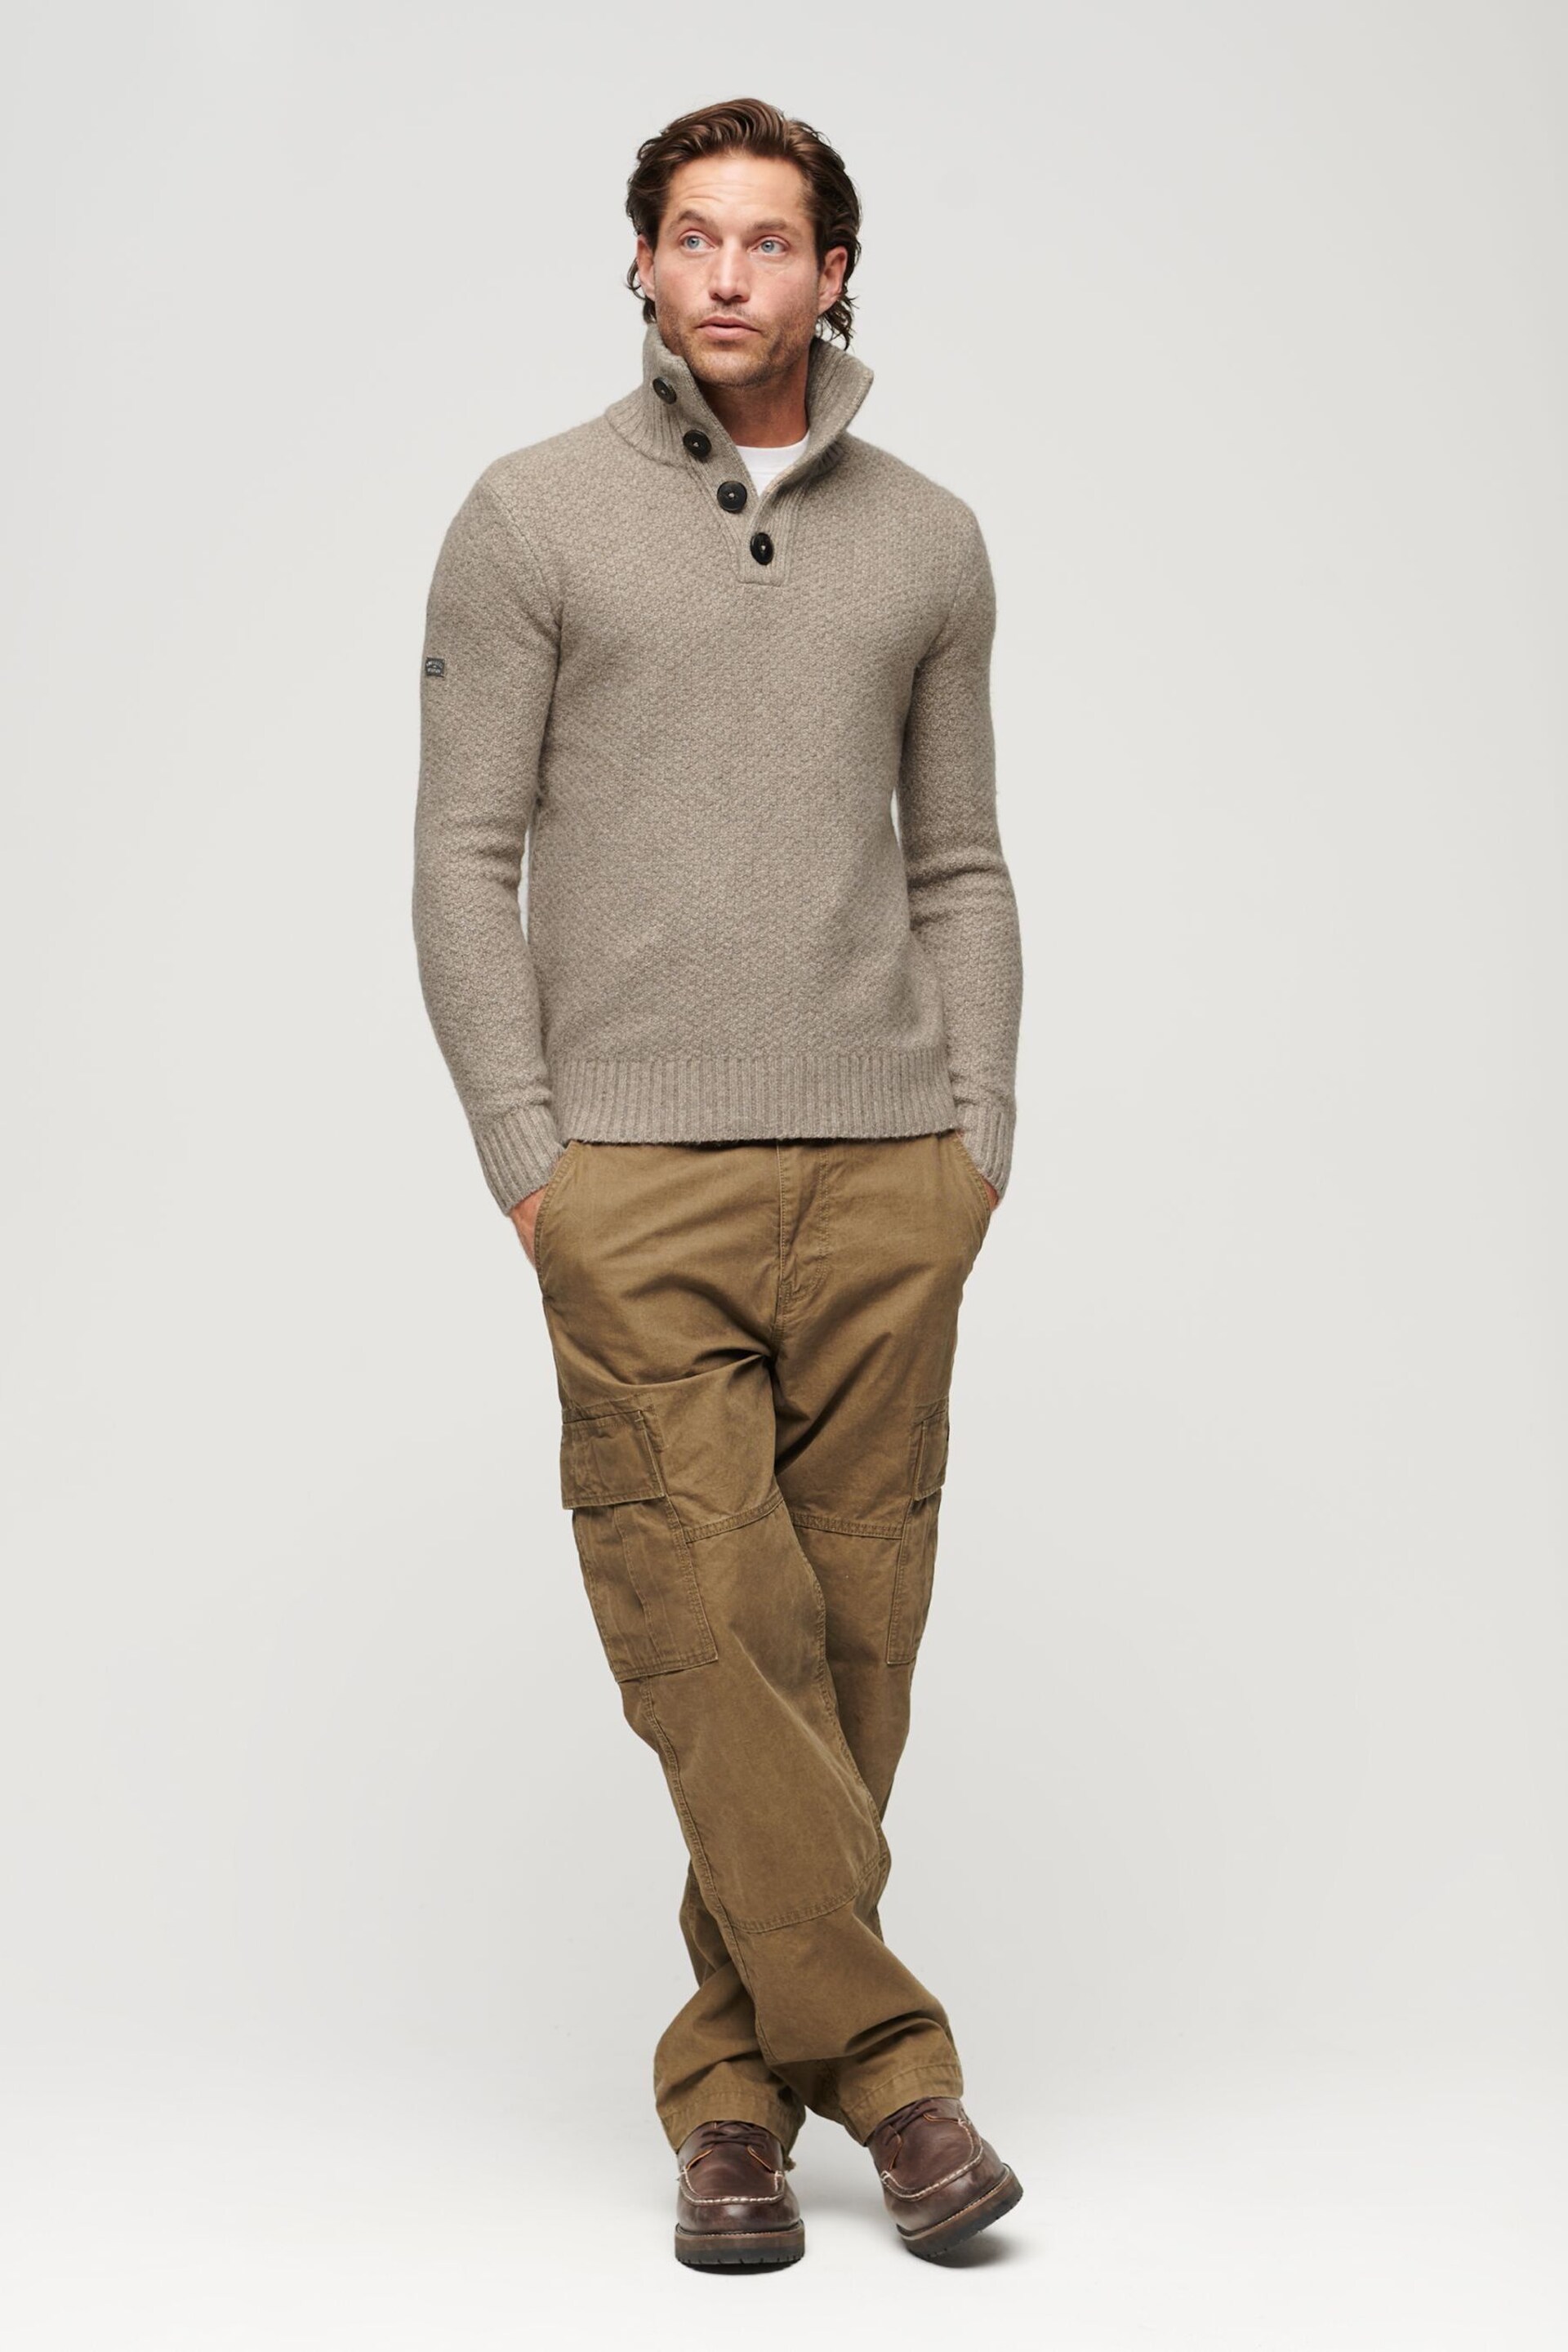 Superdry Beige Chunky Button High Neck Jumper - Image 2 of 6